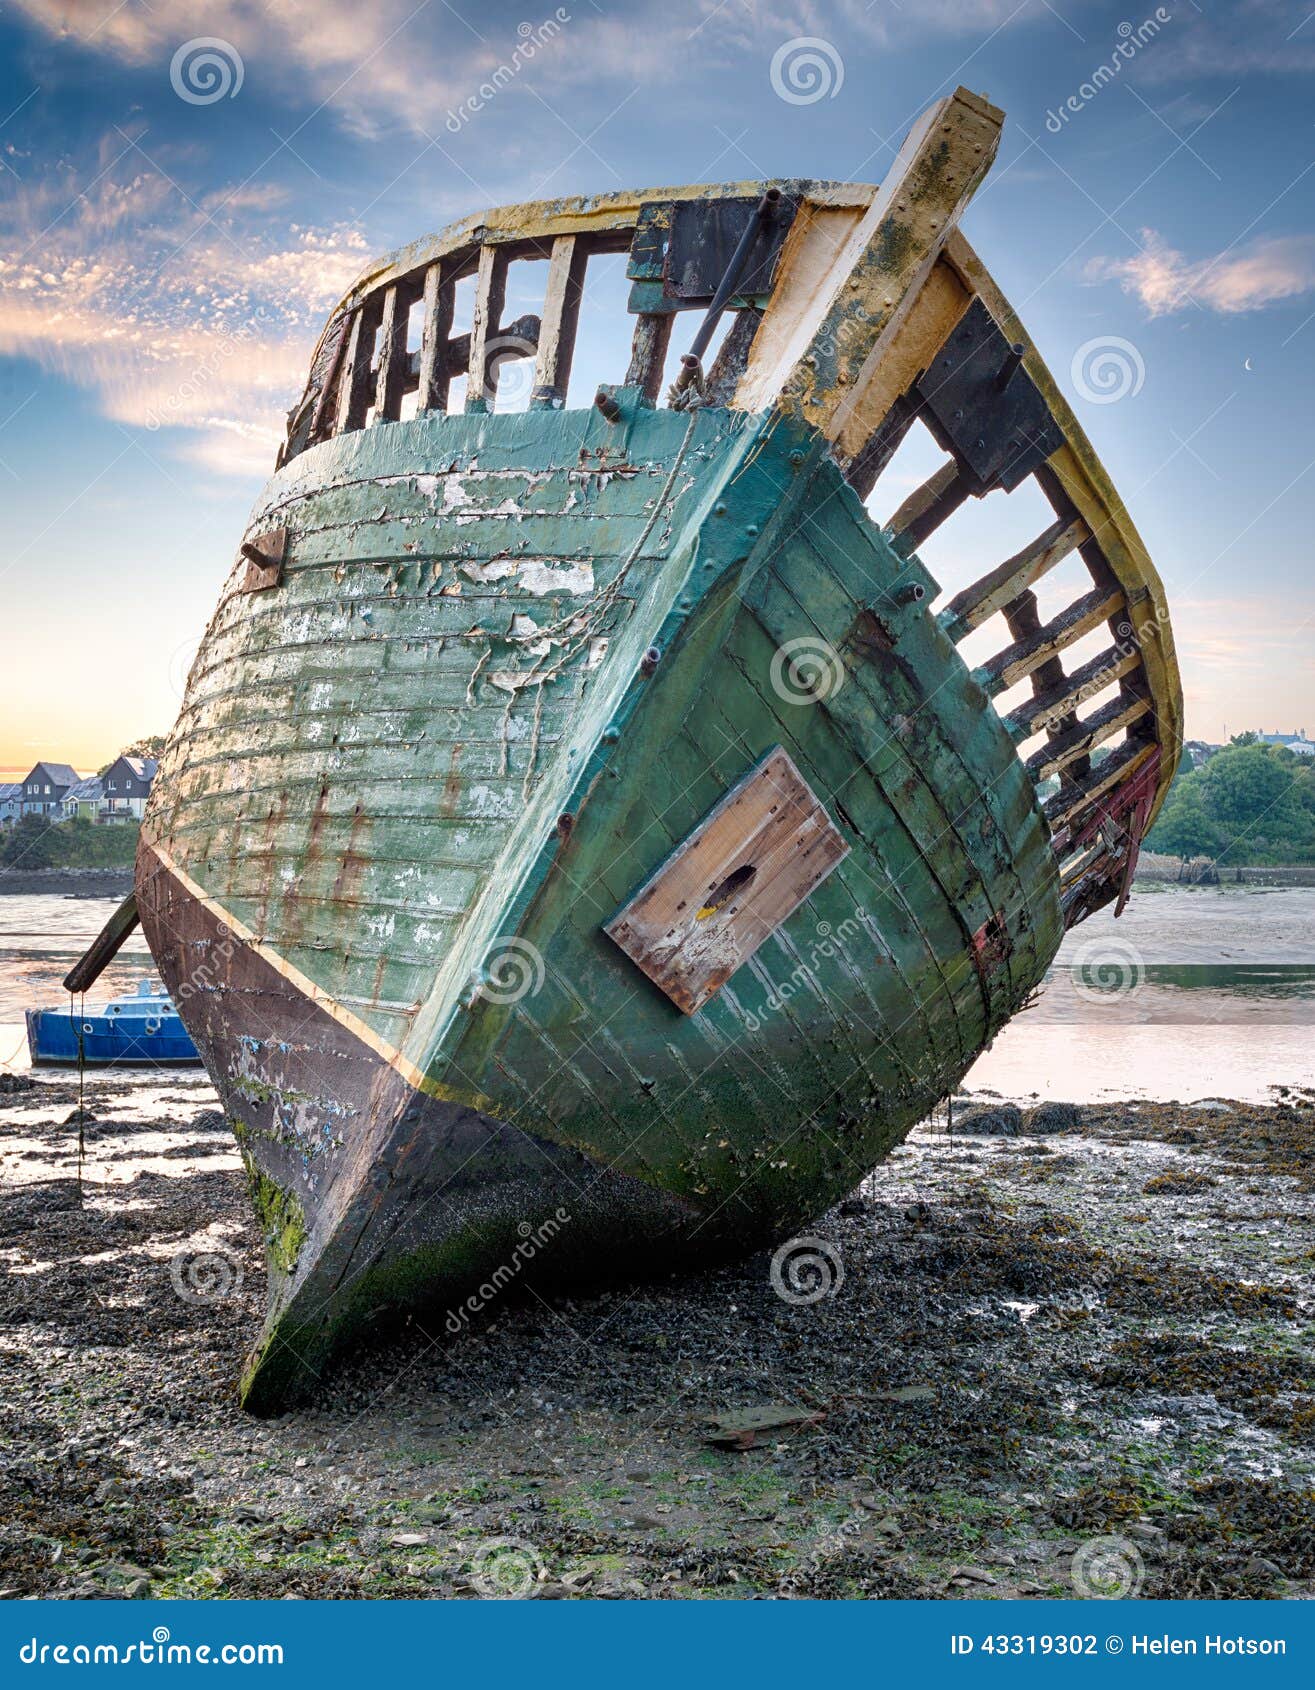 Old Shipwreck stock photo. Image of decaying, ocean, hull ...